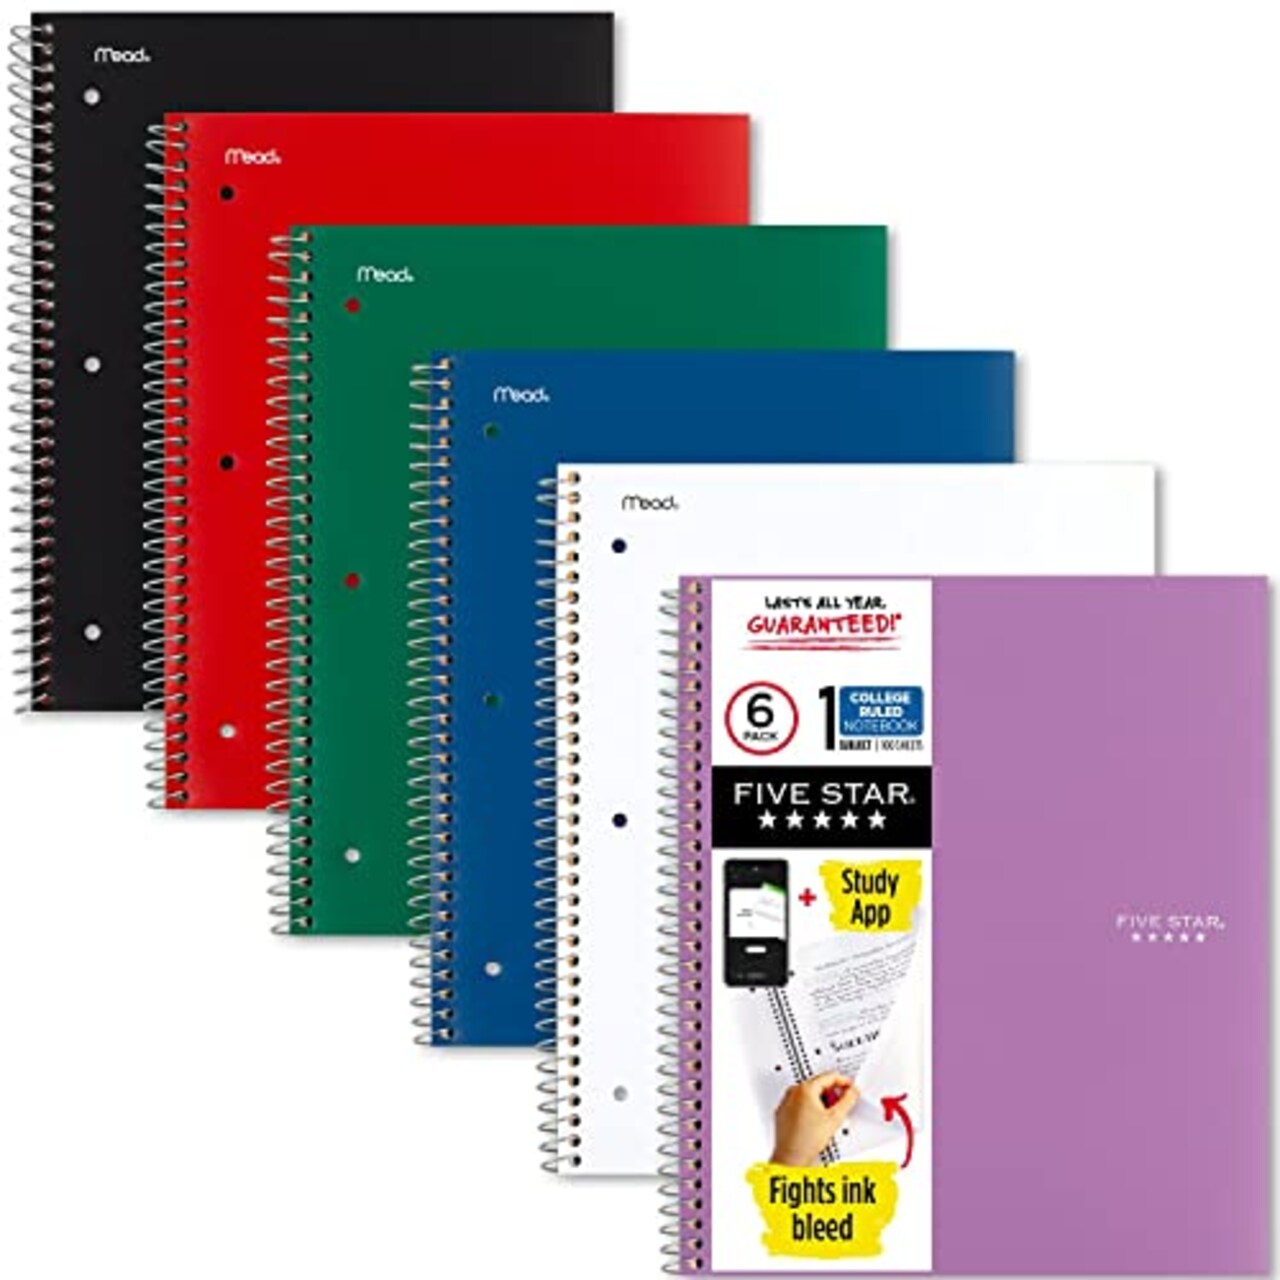 Five Star Spiral Notebook + Study App, 6 Pack, 1-Subject, College Ruled  Paper, Fights Ink Bleed, Water Resistant Cover, 8-1/2 x 11, 100 Sheets,  Color Will Vary (38052)